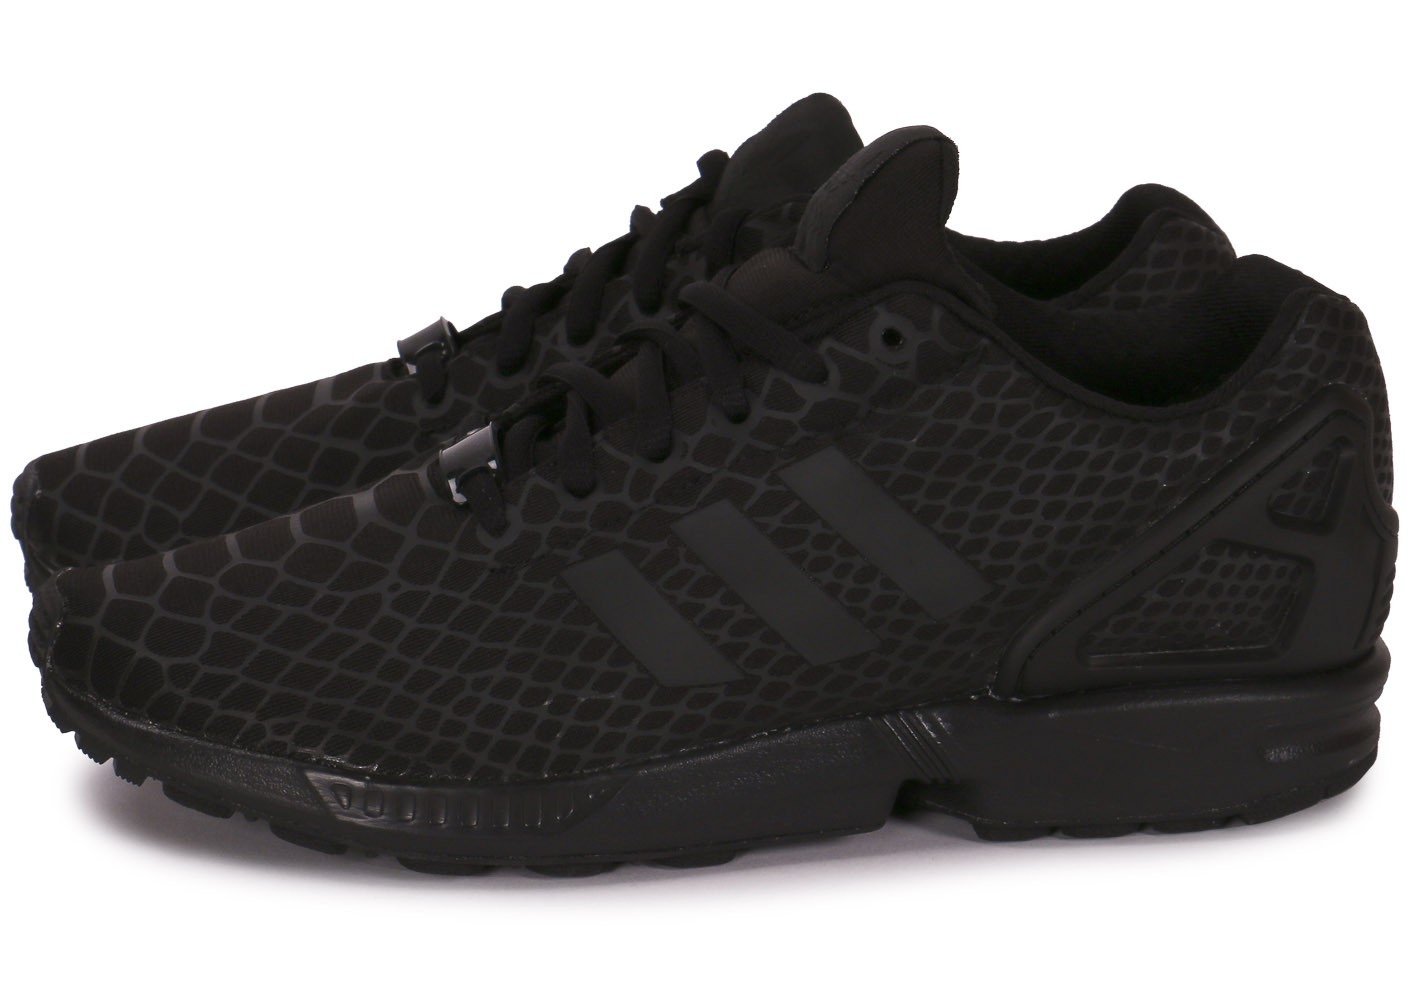 adidas zx flux homme 2016